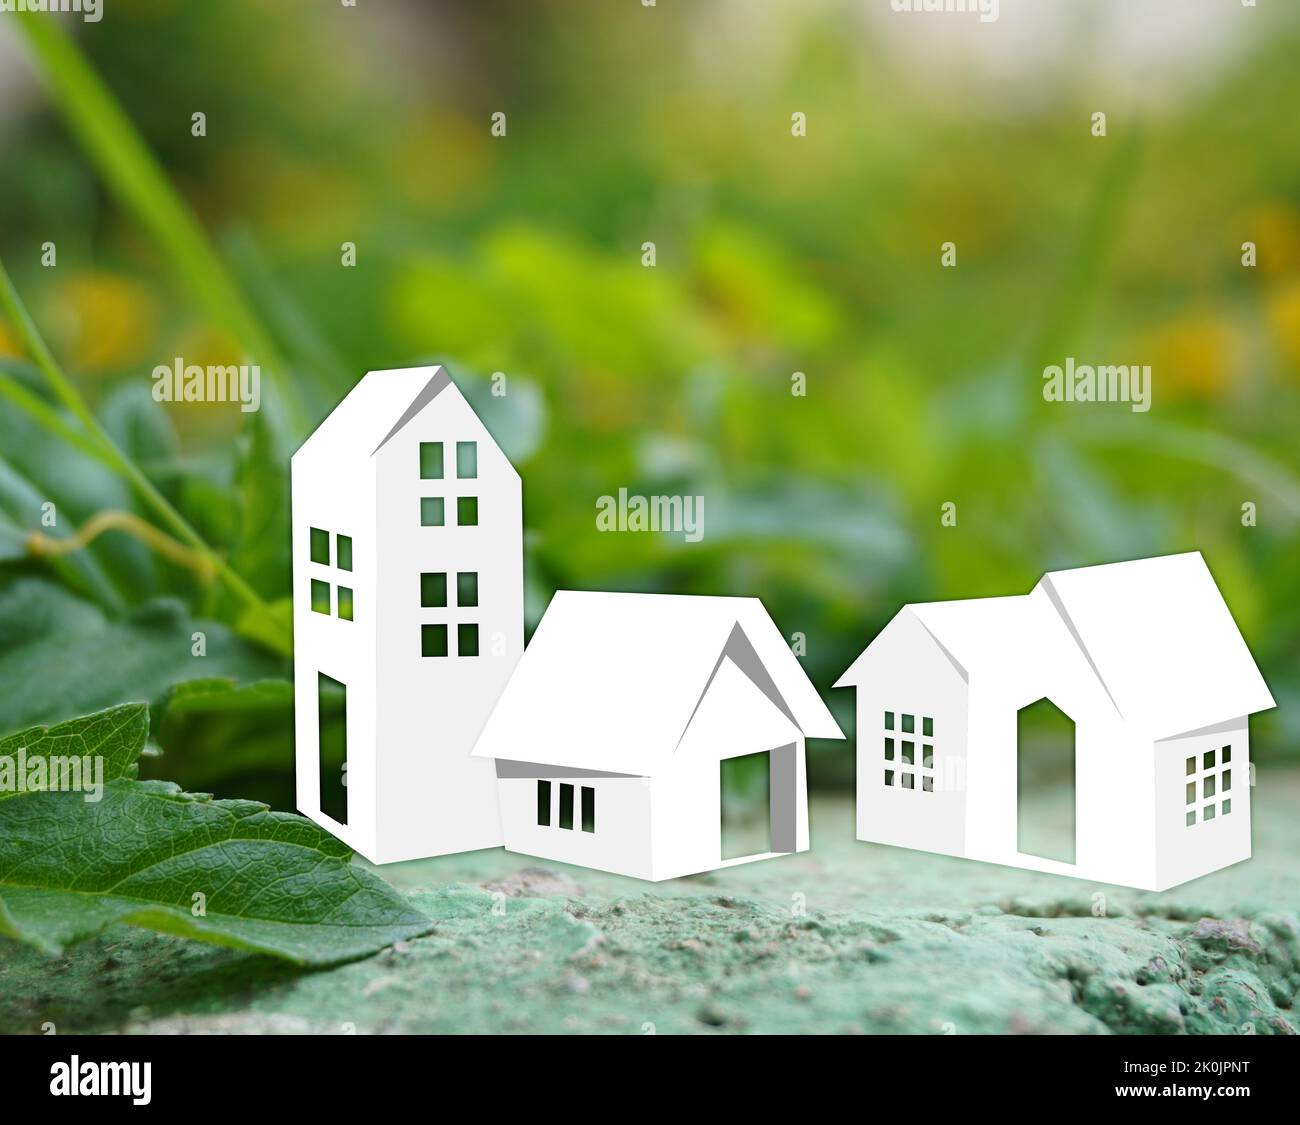 Eco friendly building architecture concept stock image green background Stock Photo